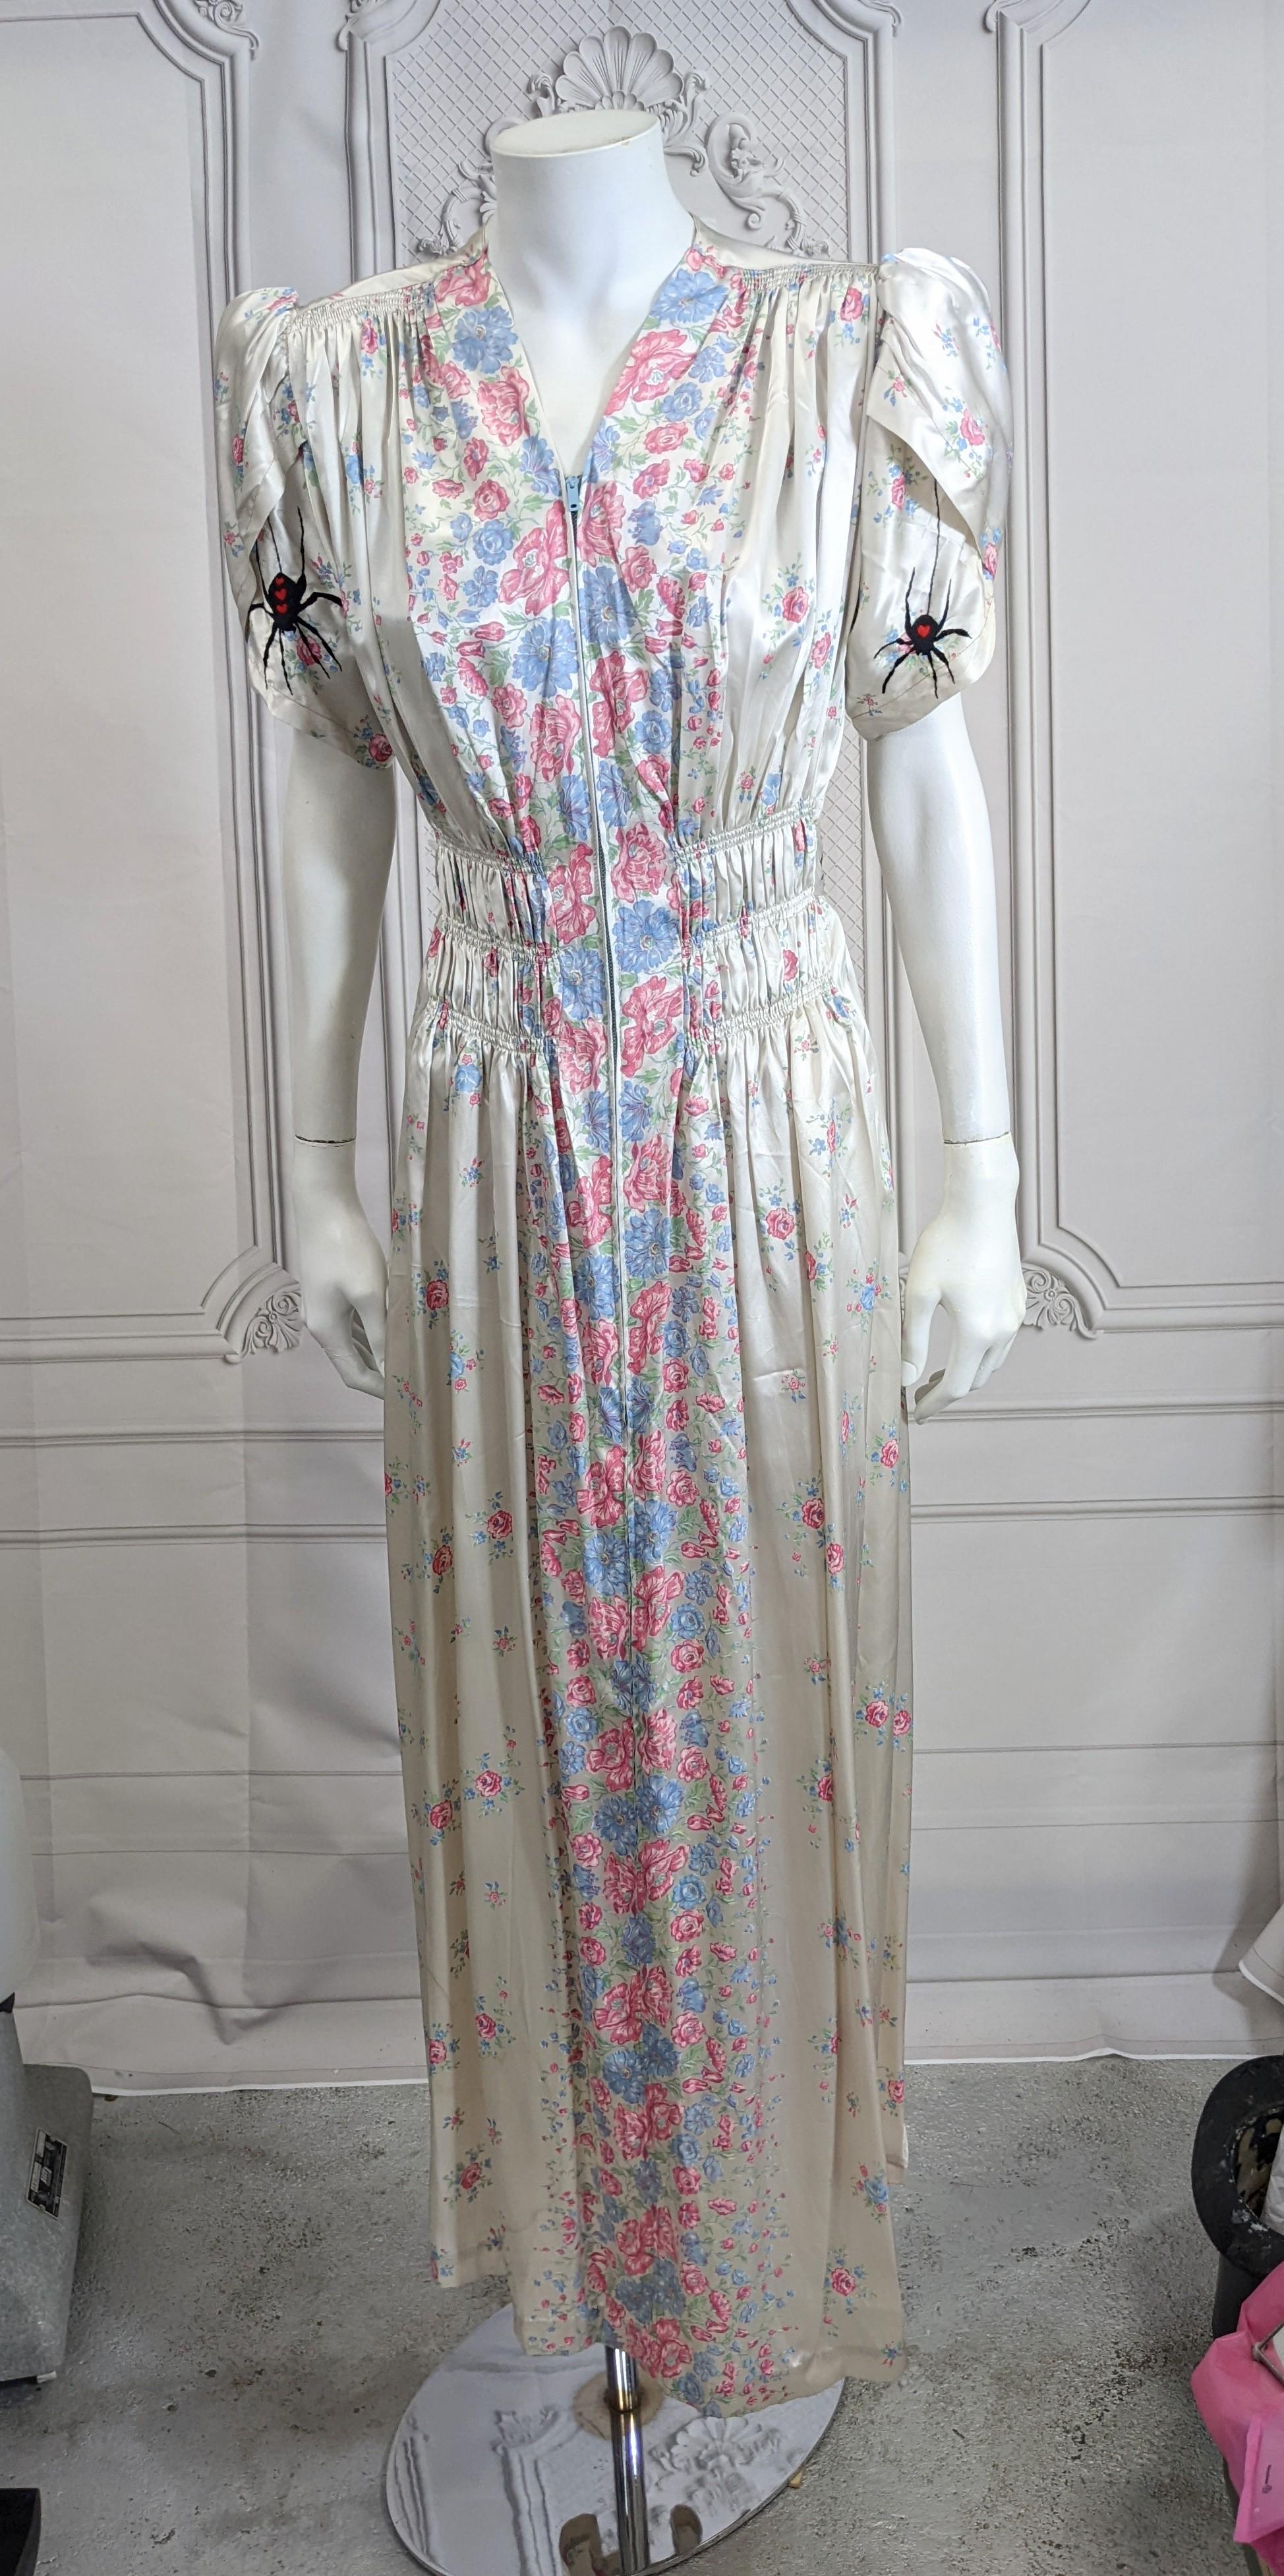 Creepy and cool pale blue rayon floral gown with hand embroidery, Studio VL. Period rayon satin floral dressing gown with front zip entry, hand embroidered with hidden black widow spiders under the petal sleeves and waterbugs along the back belt.